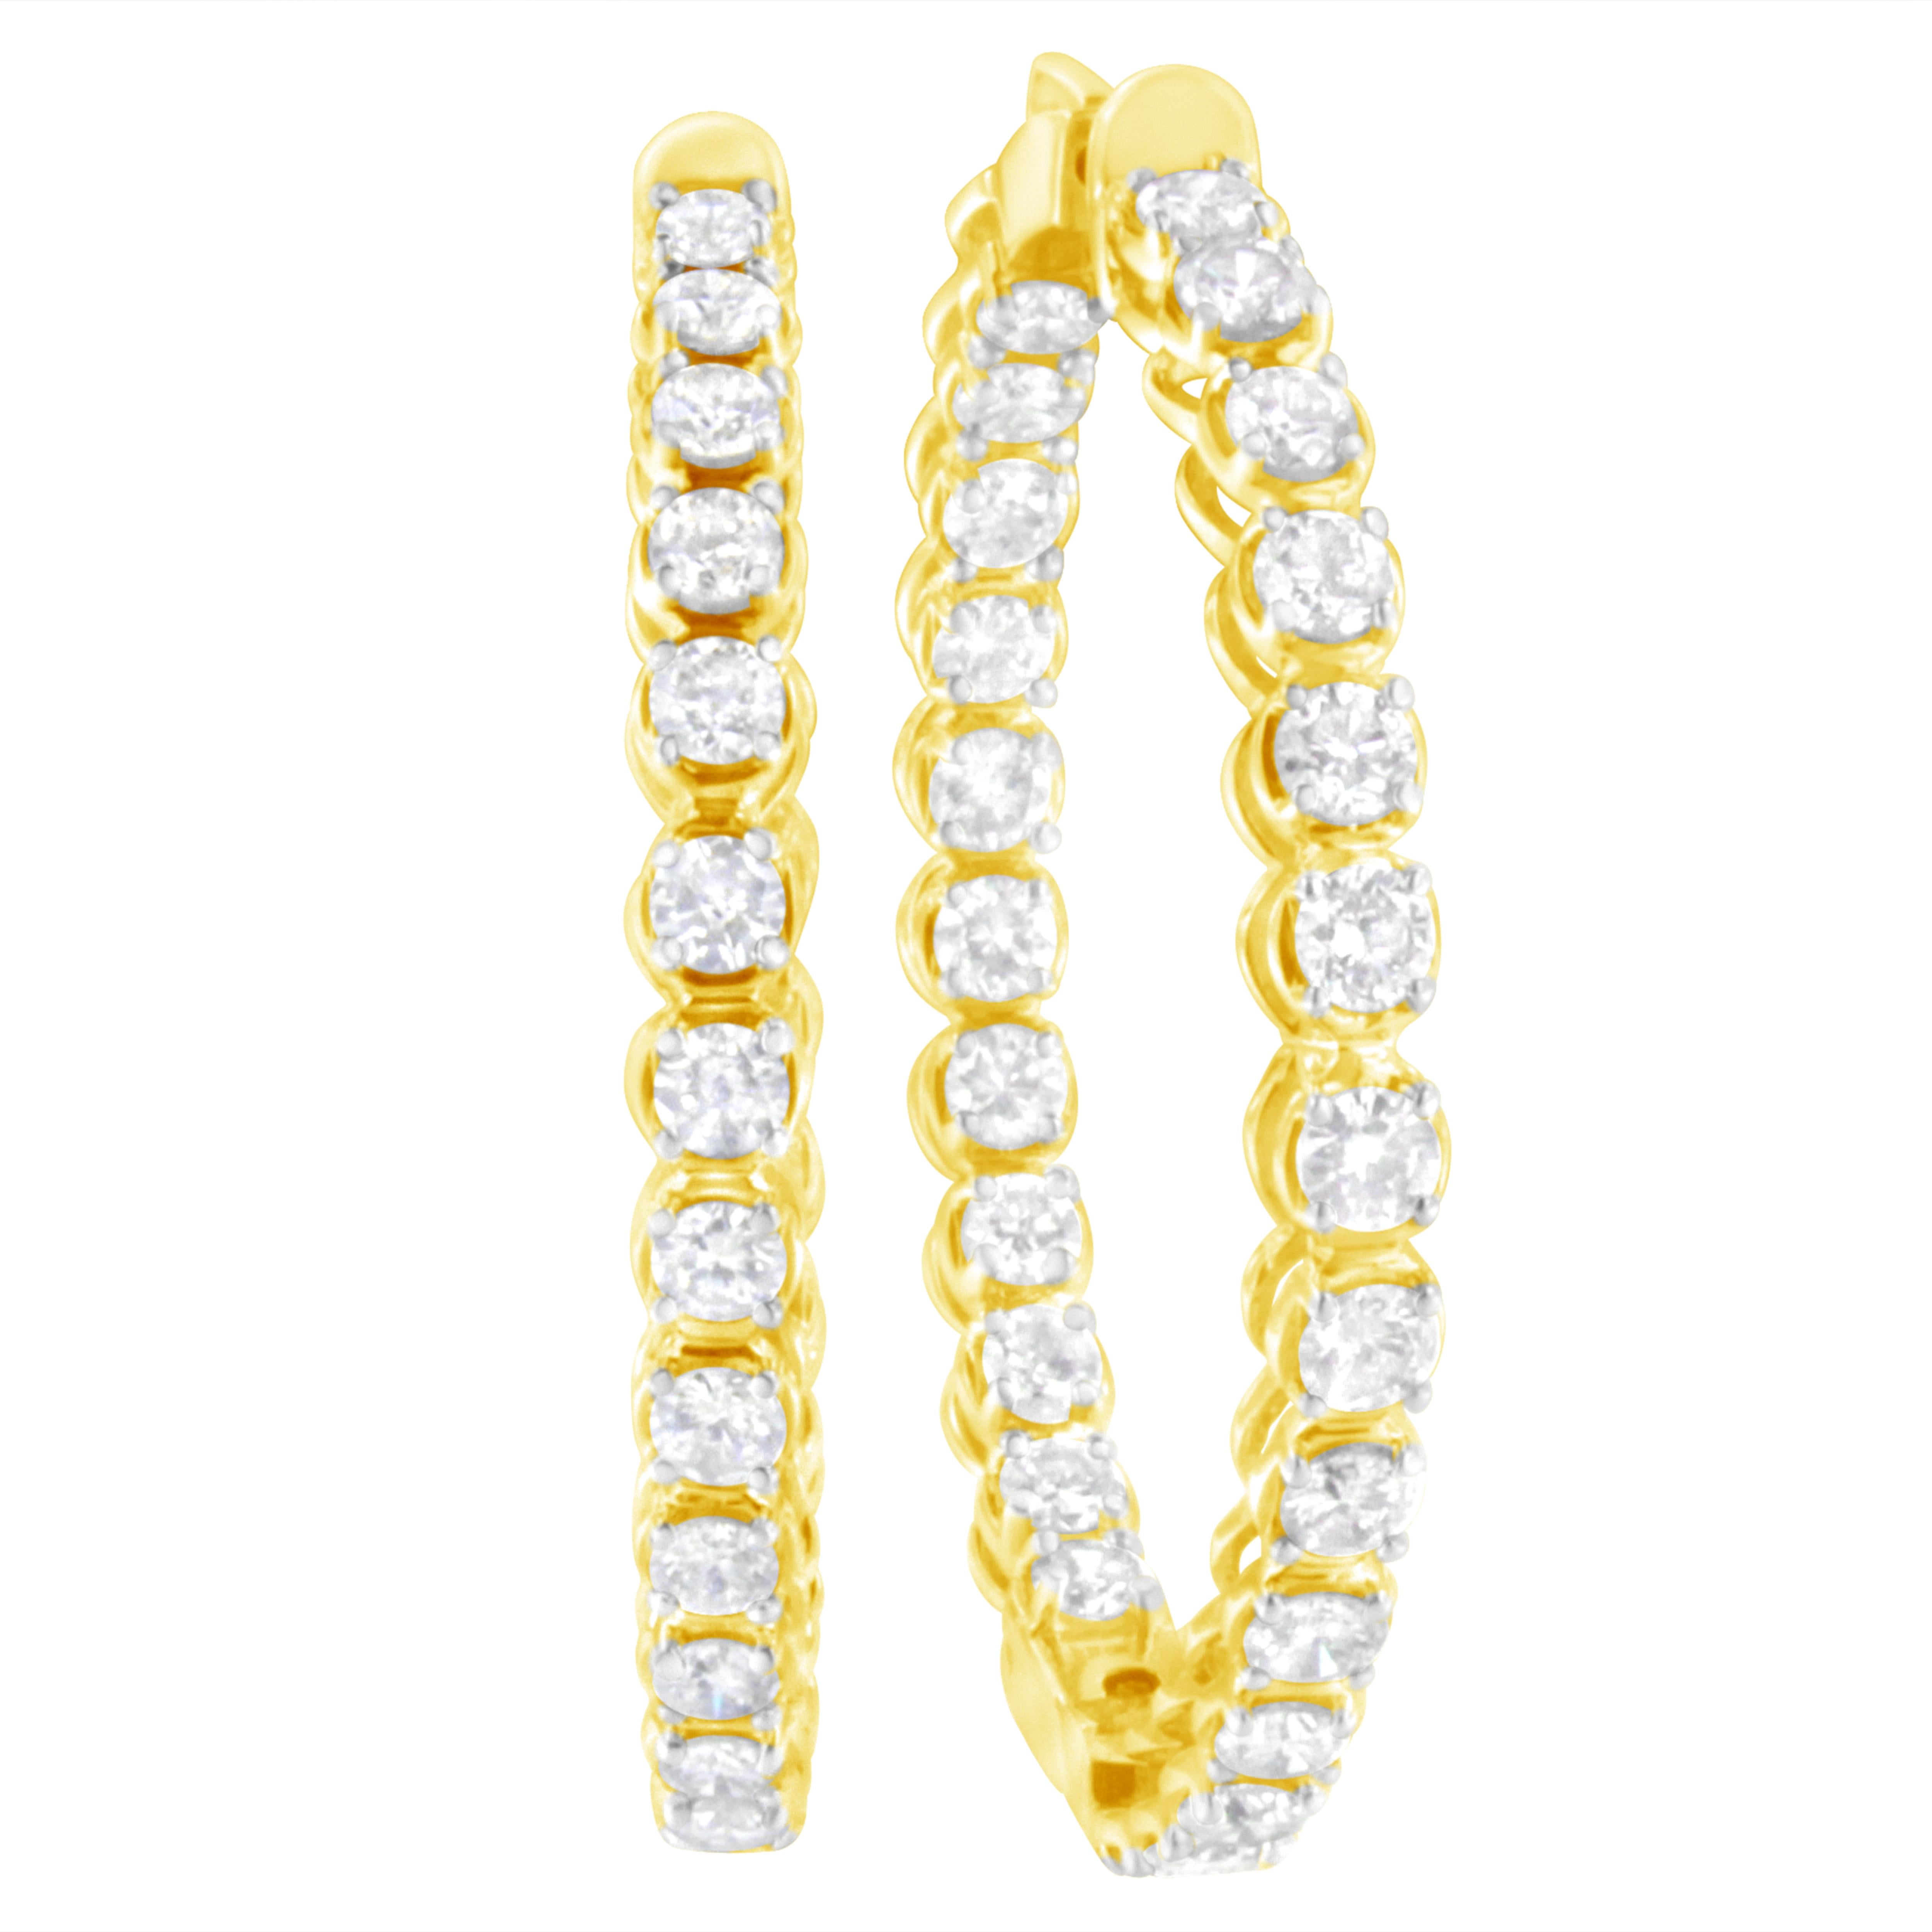 Modern Yellow Gold Plated Sterling Silver 7.0 Carat Diamond Inside Out Hoop Earrings